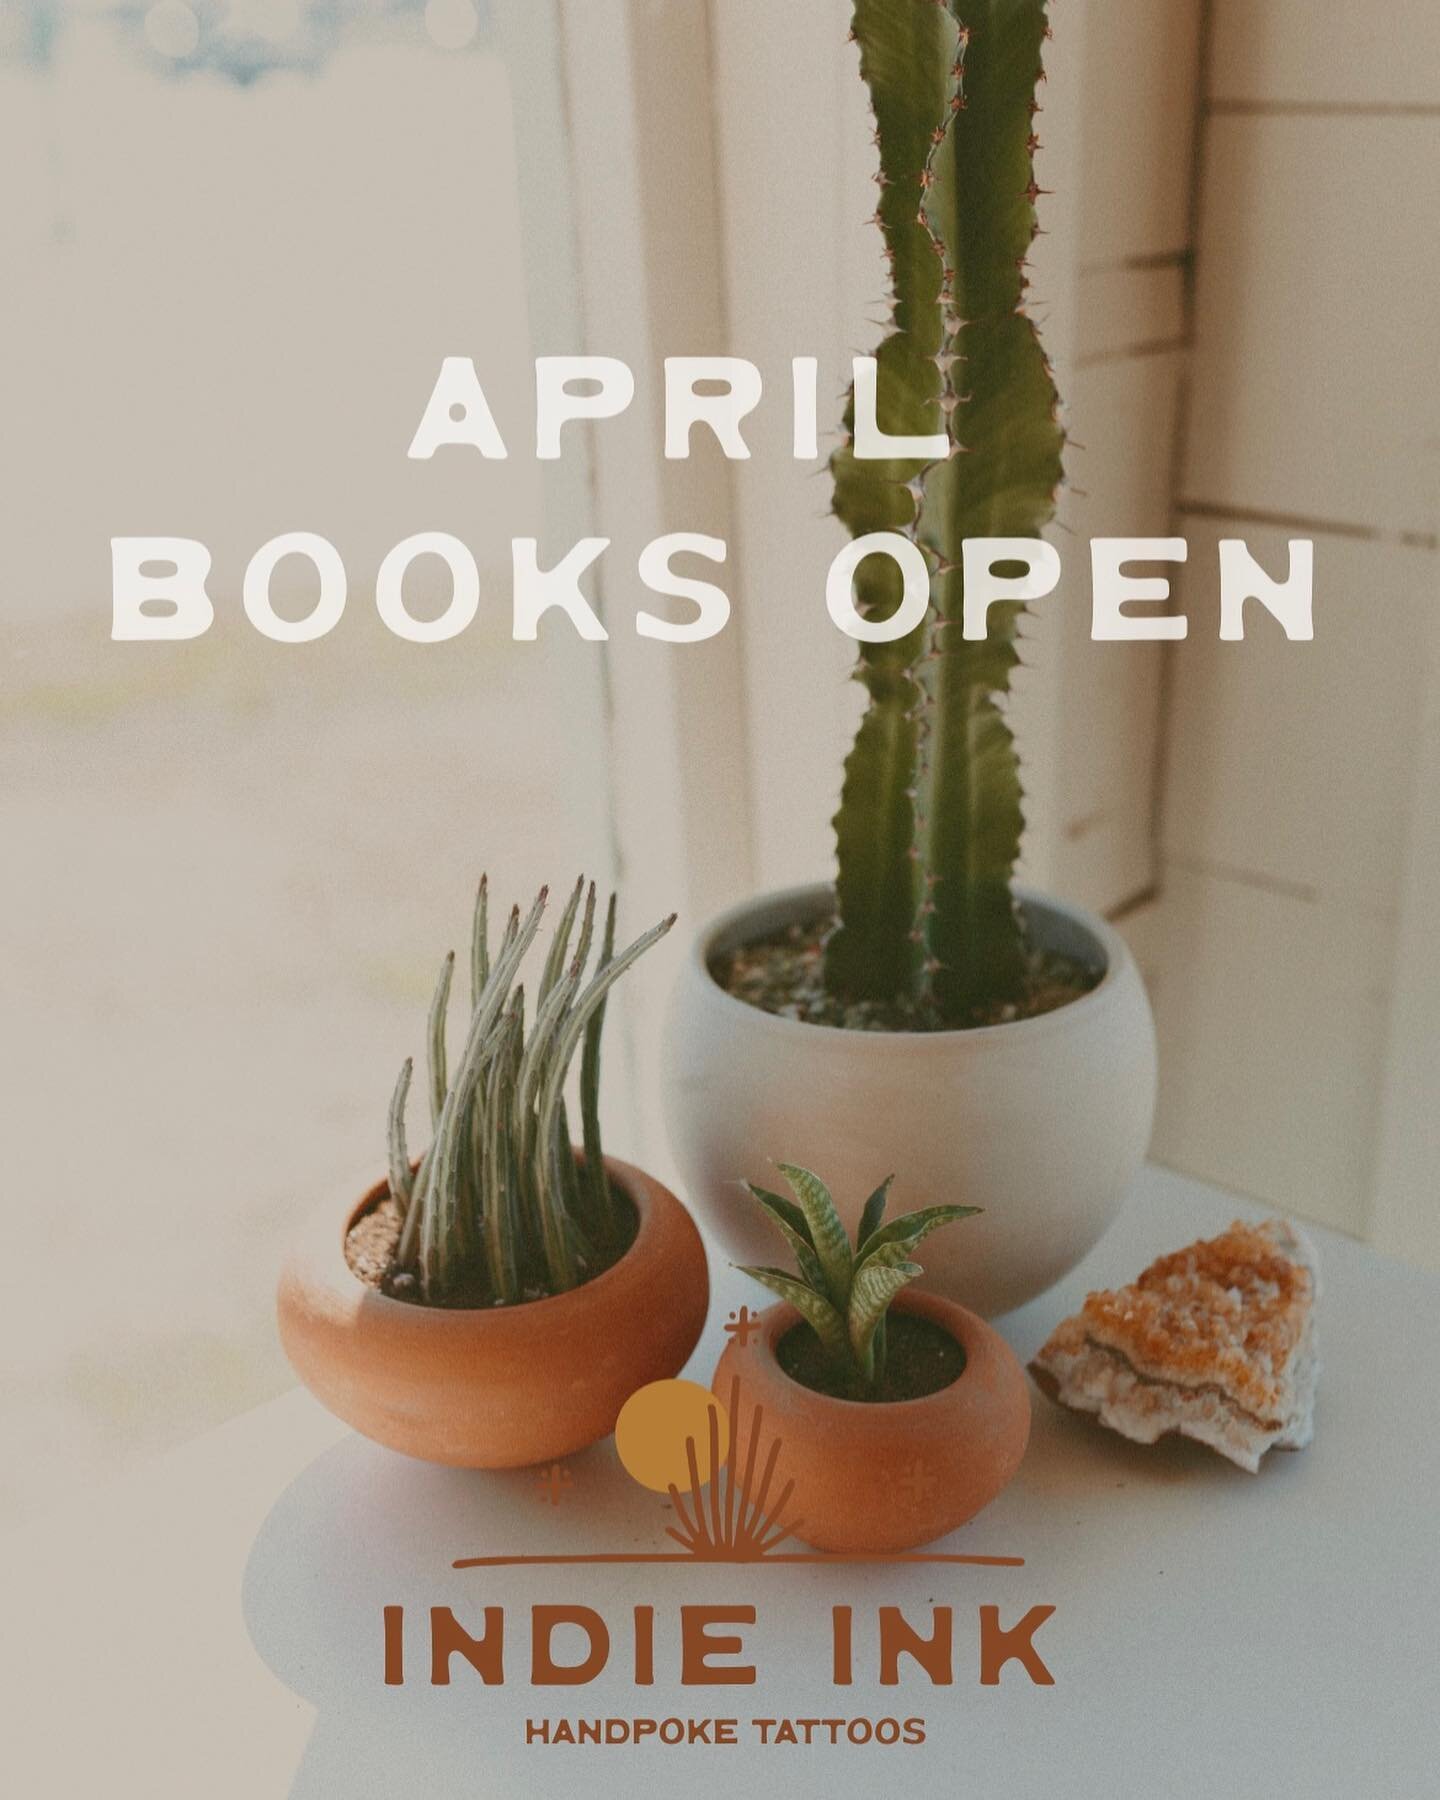 BOOKS ARE OPEN - book through our website ✨